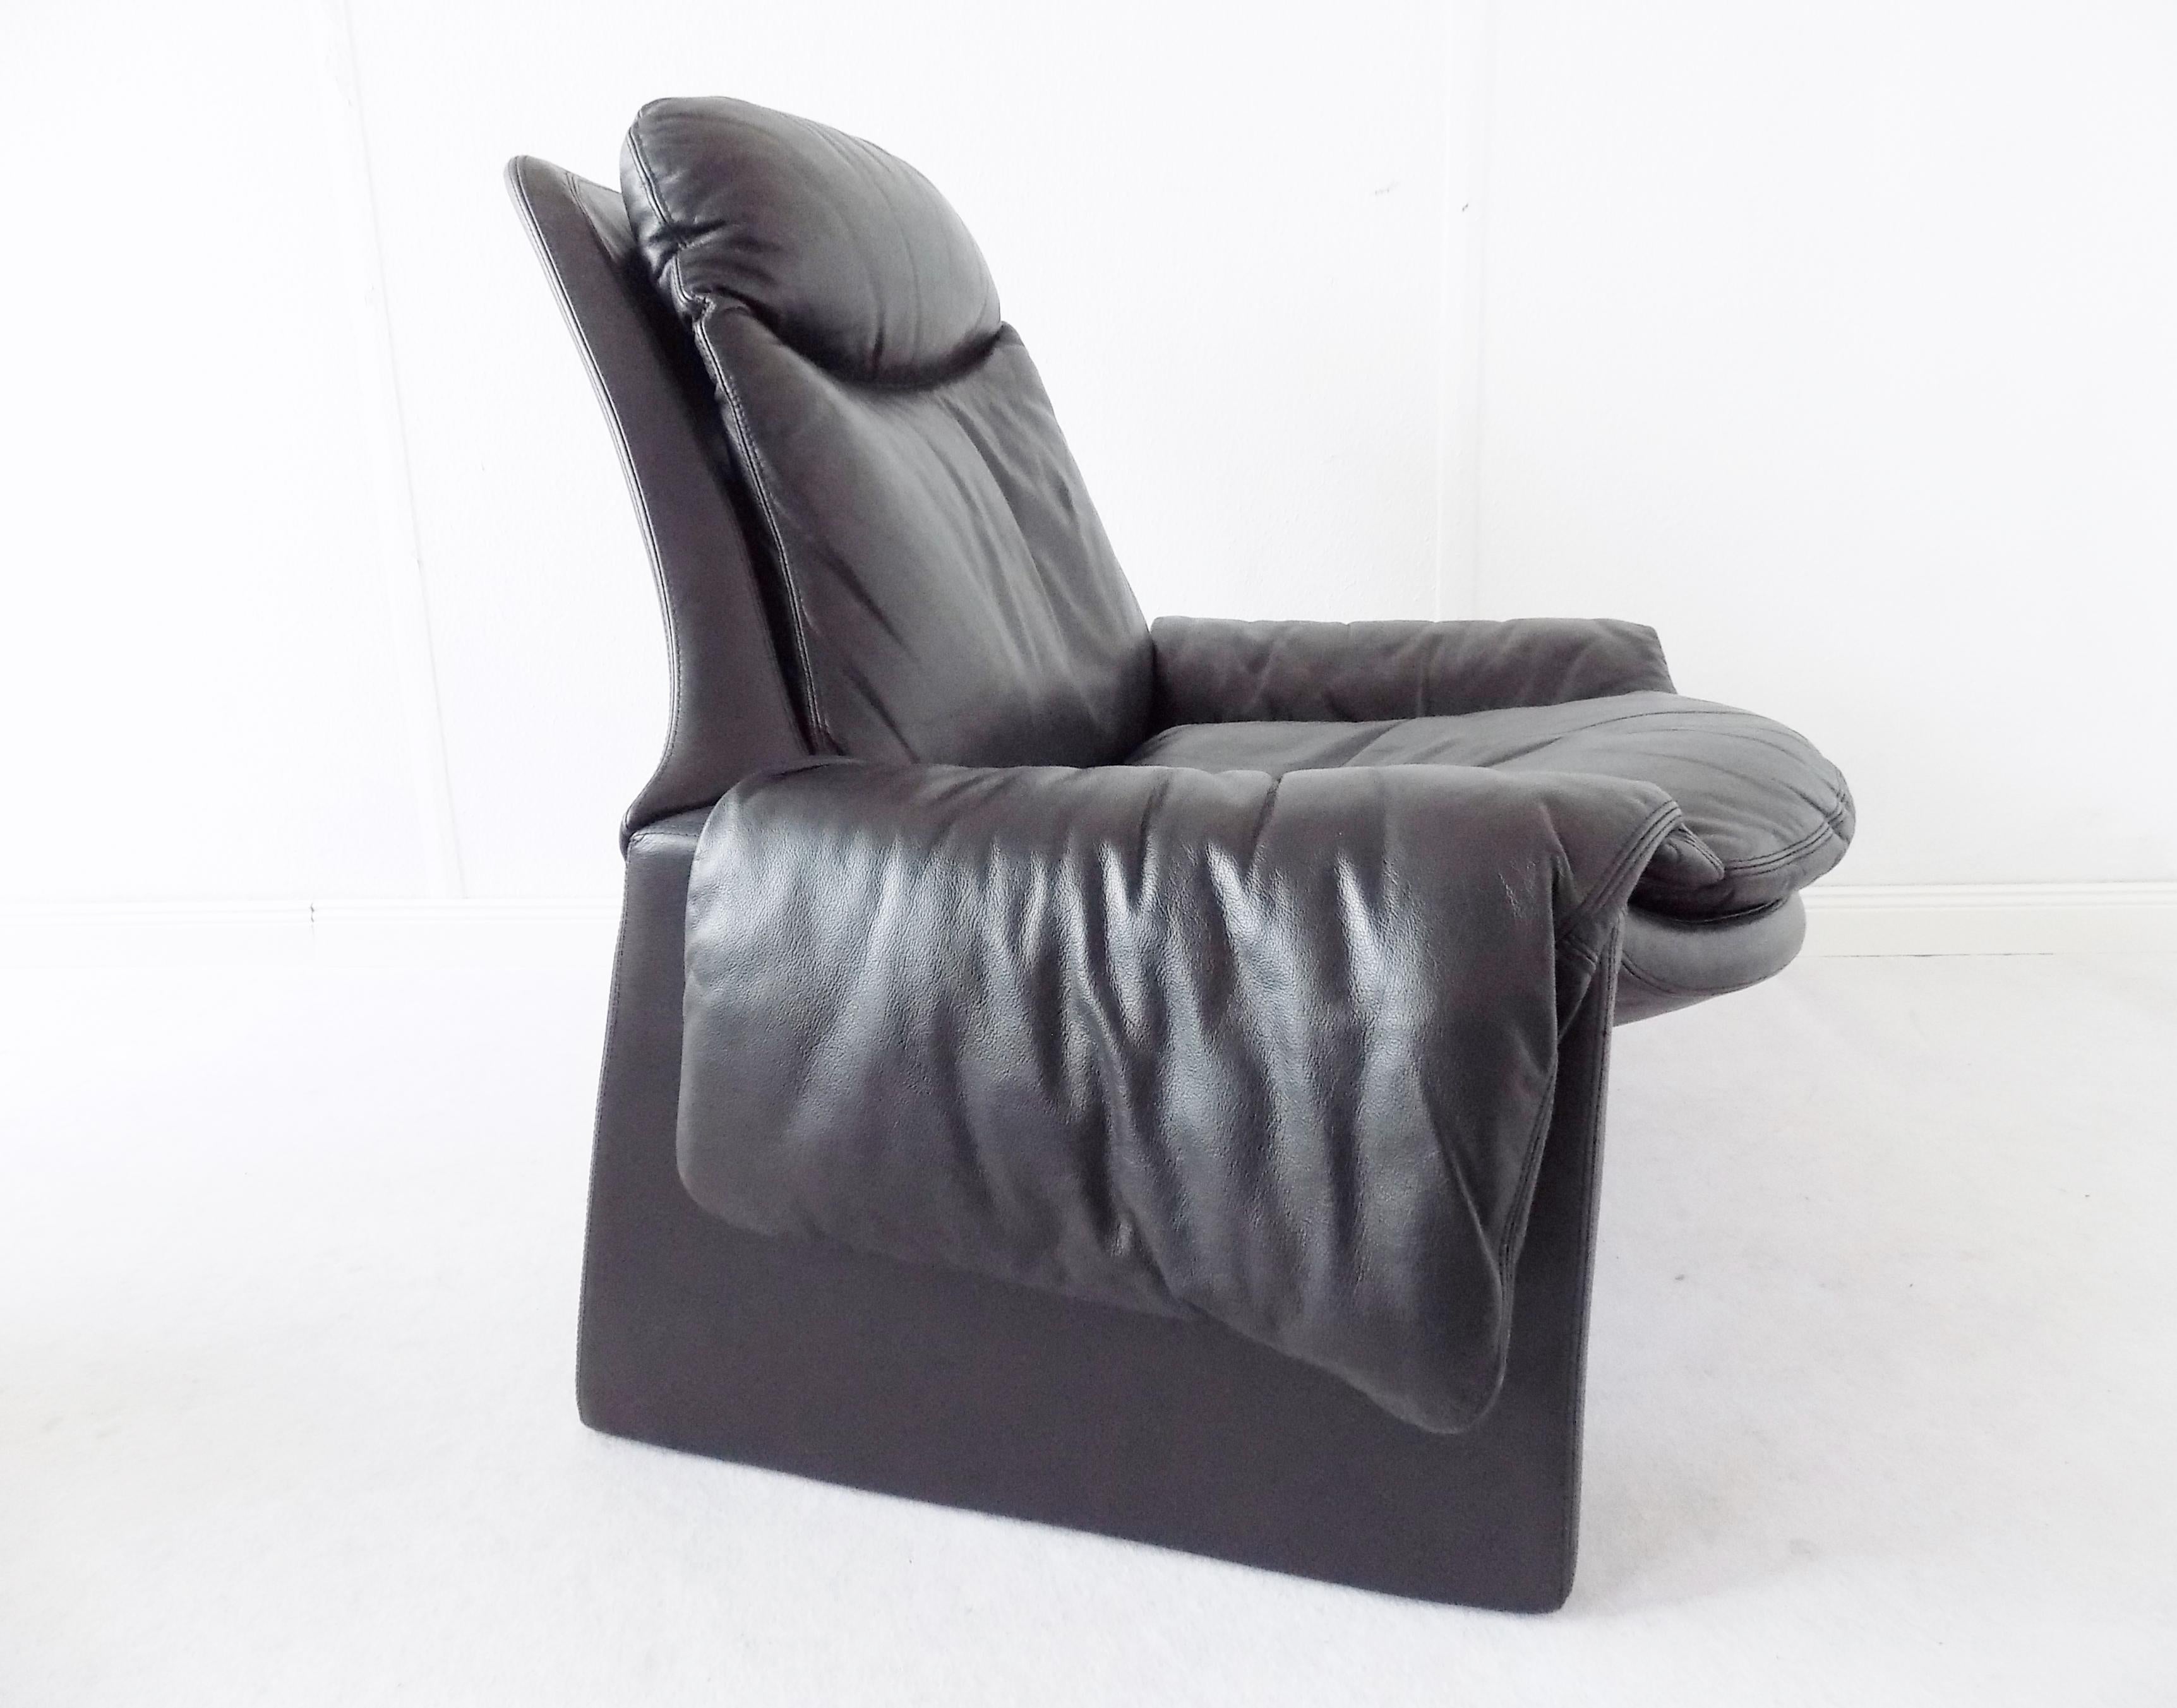 Saporiti P 60 Black Lounge Chair by Vittorio Introini, Italian Modern, Excellent In Good Condition For Sale In Ludwigslust, Mecklenburg-Vorpommern